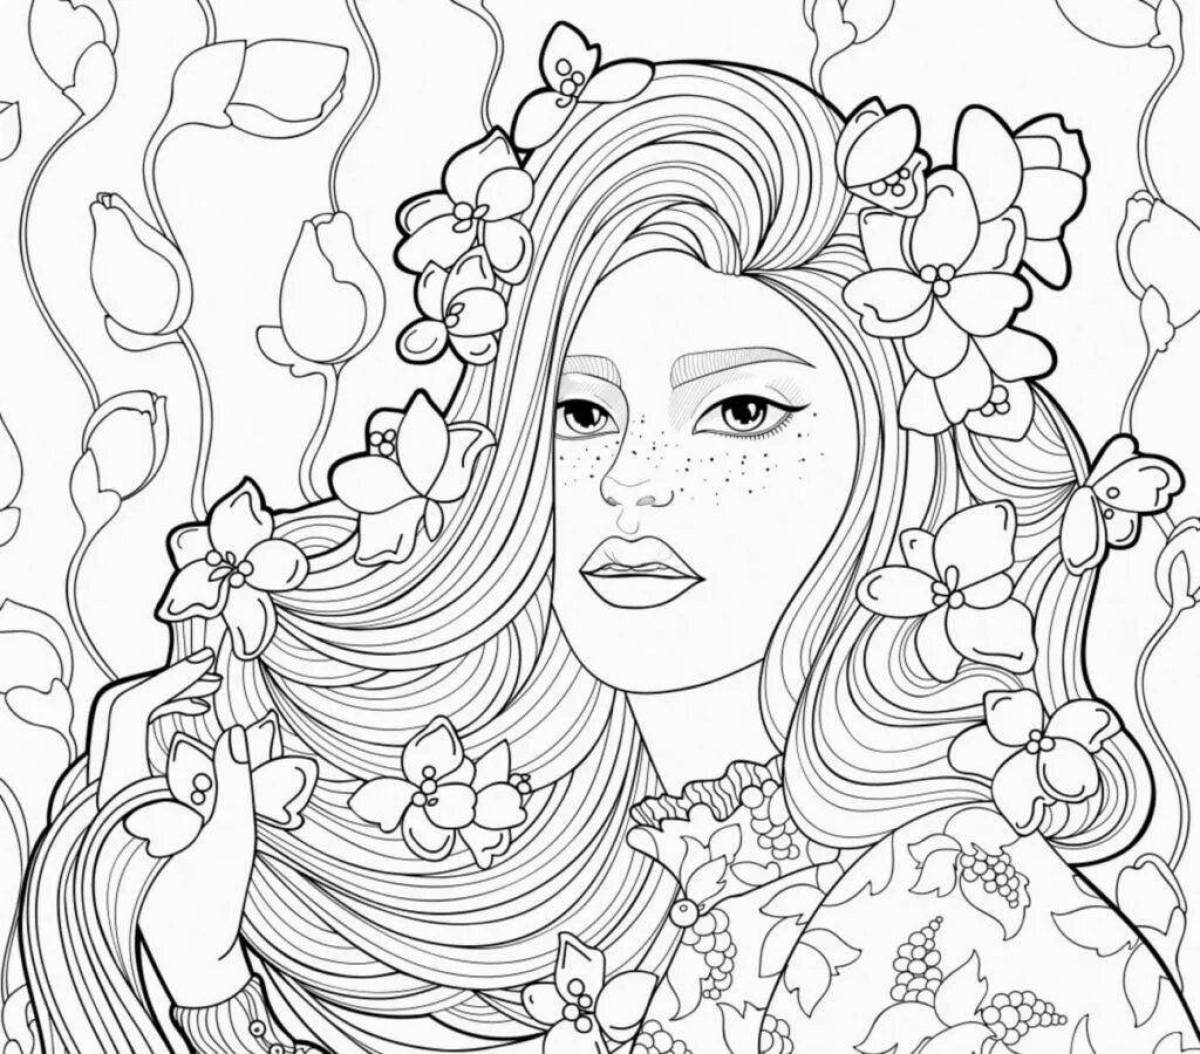 Spectacular coloring book for girls 9-10 years old